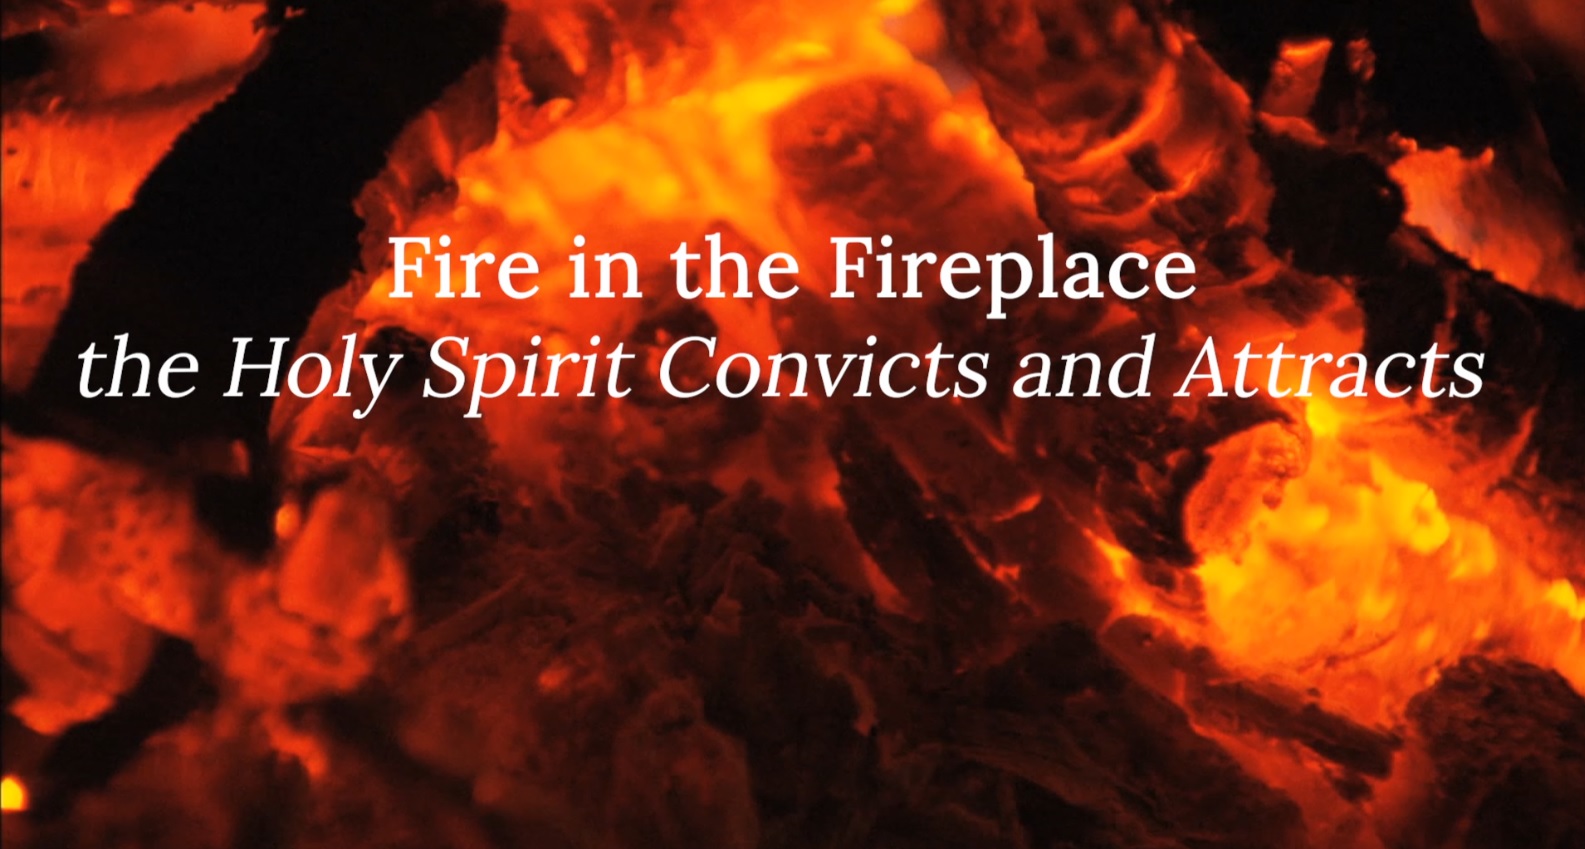 Fire in the Fireplace: the Holy Spirit Convicts and Attracts